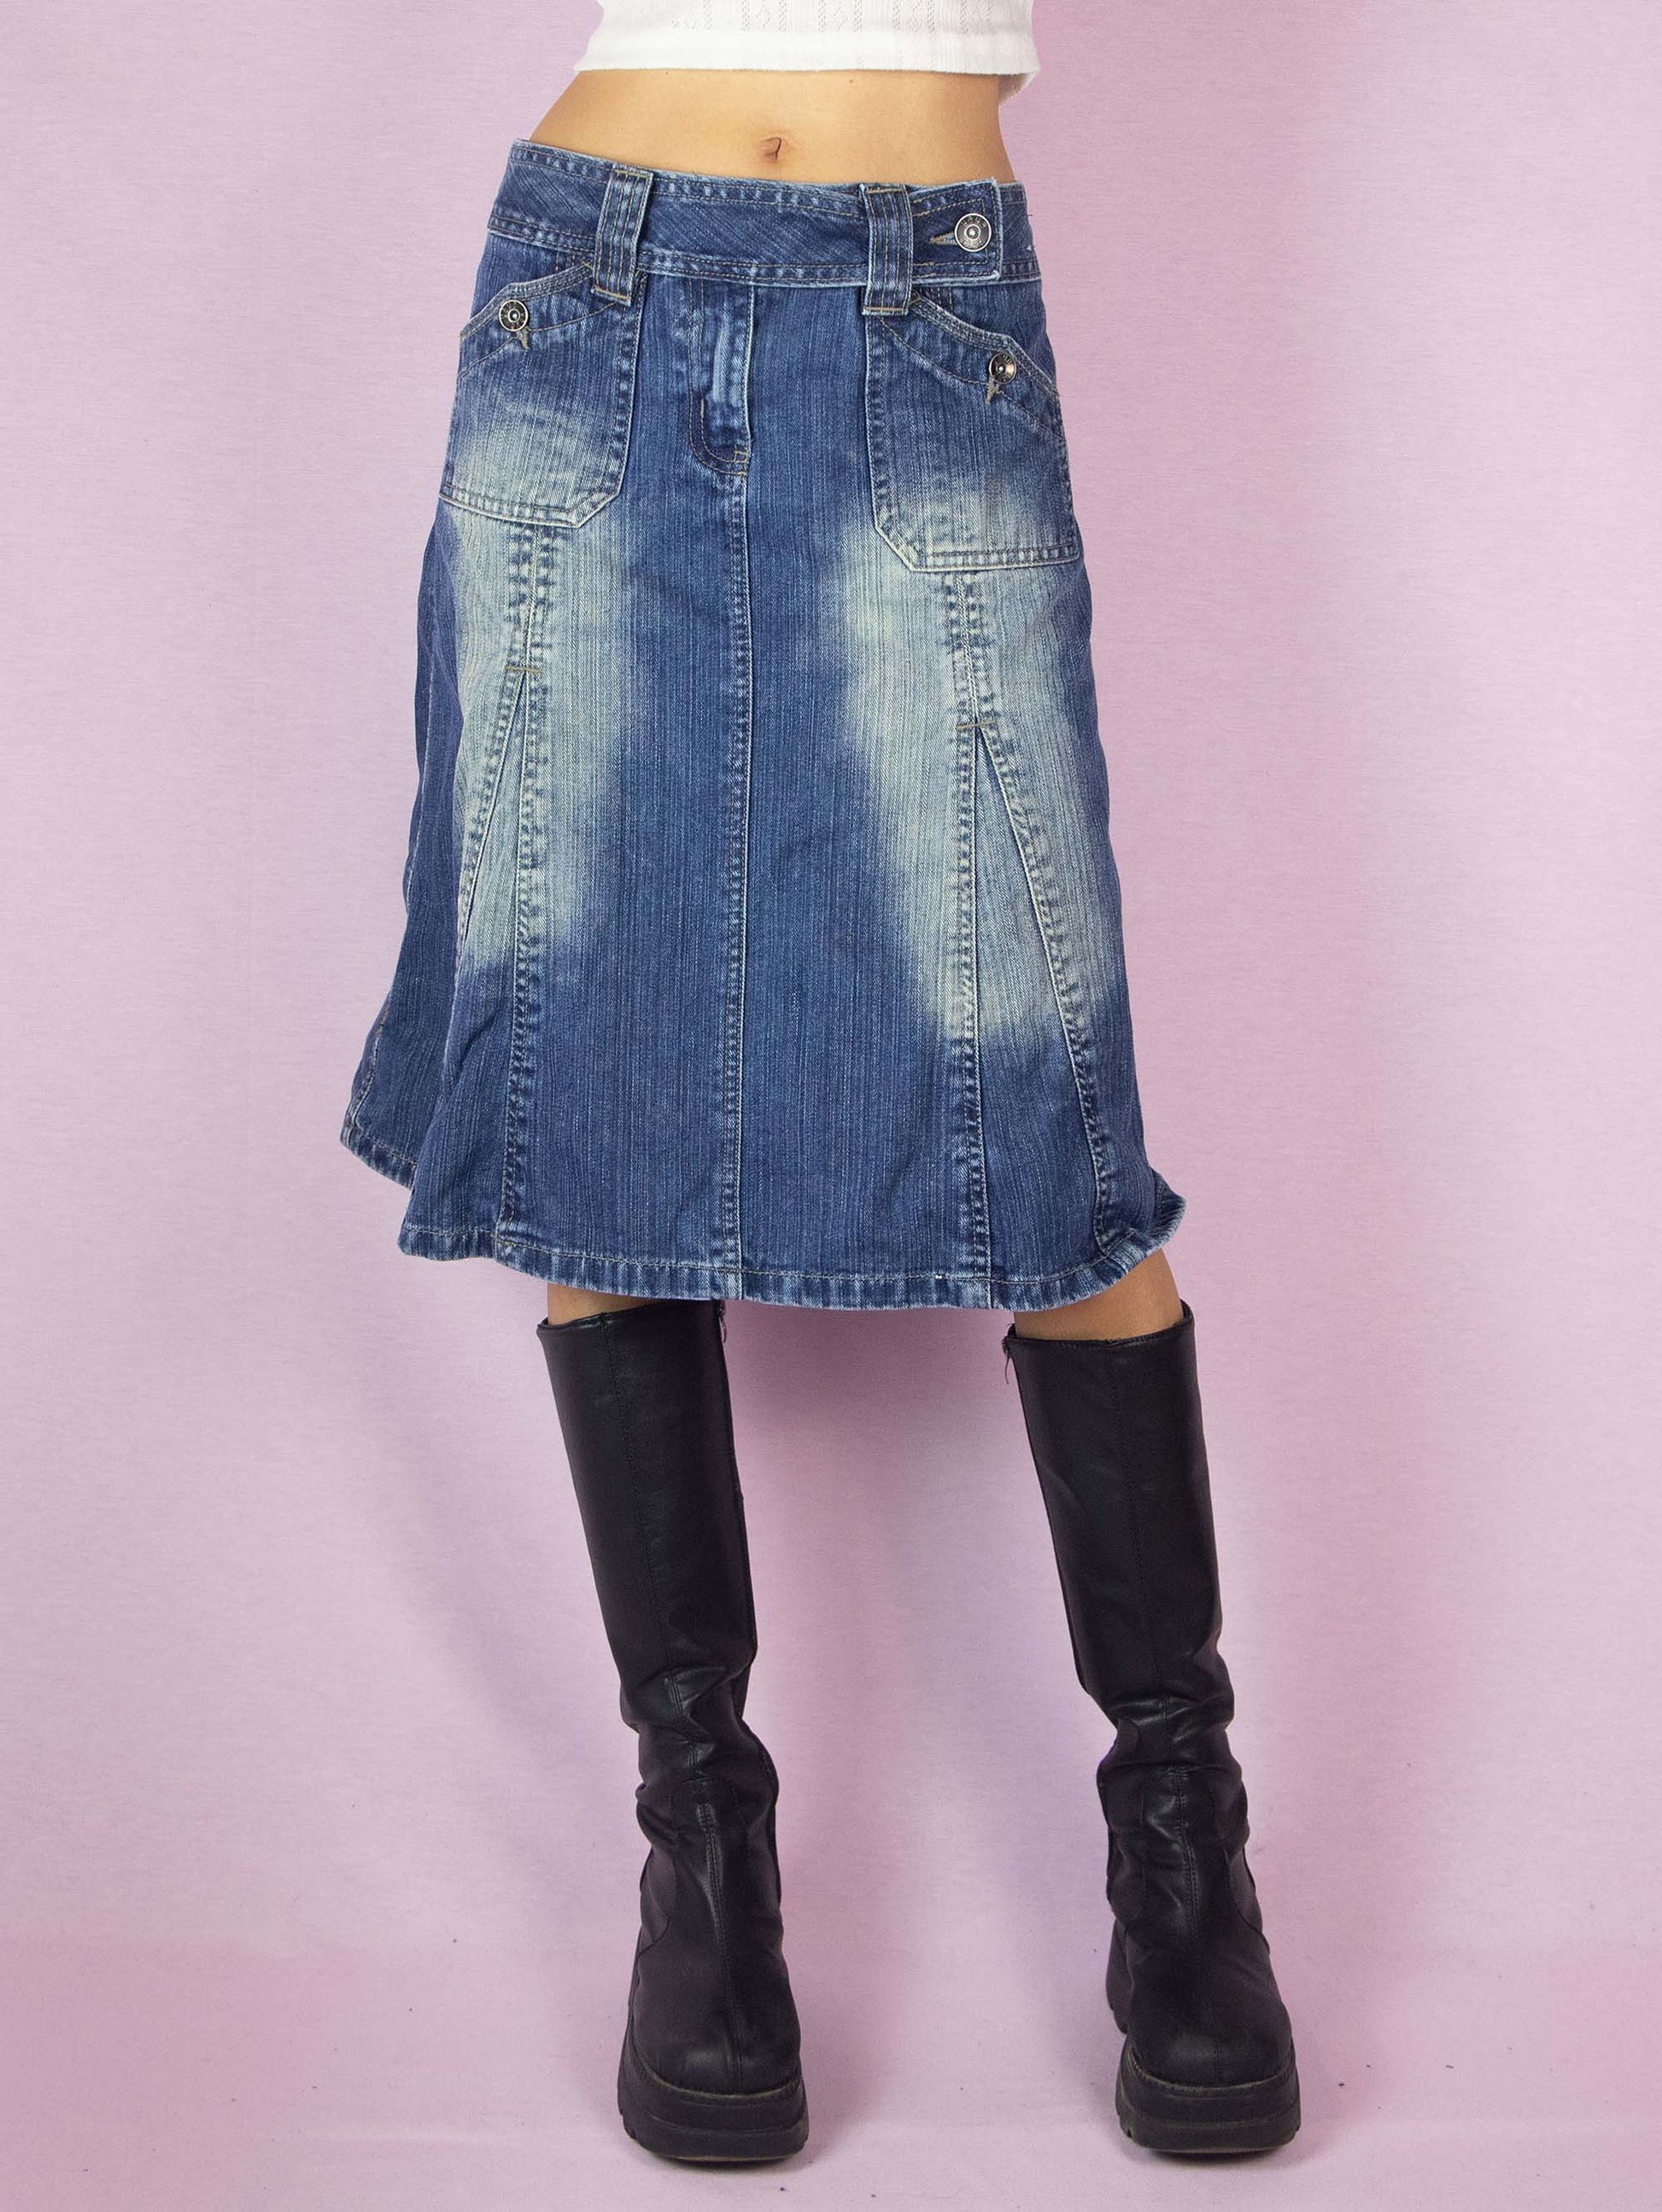 The Y2K Denim Godet A Line Skirt is a vintage 2000s subversive streetwear style jean midi skirt featuring pockets, front zipper closure, and acid wash details.